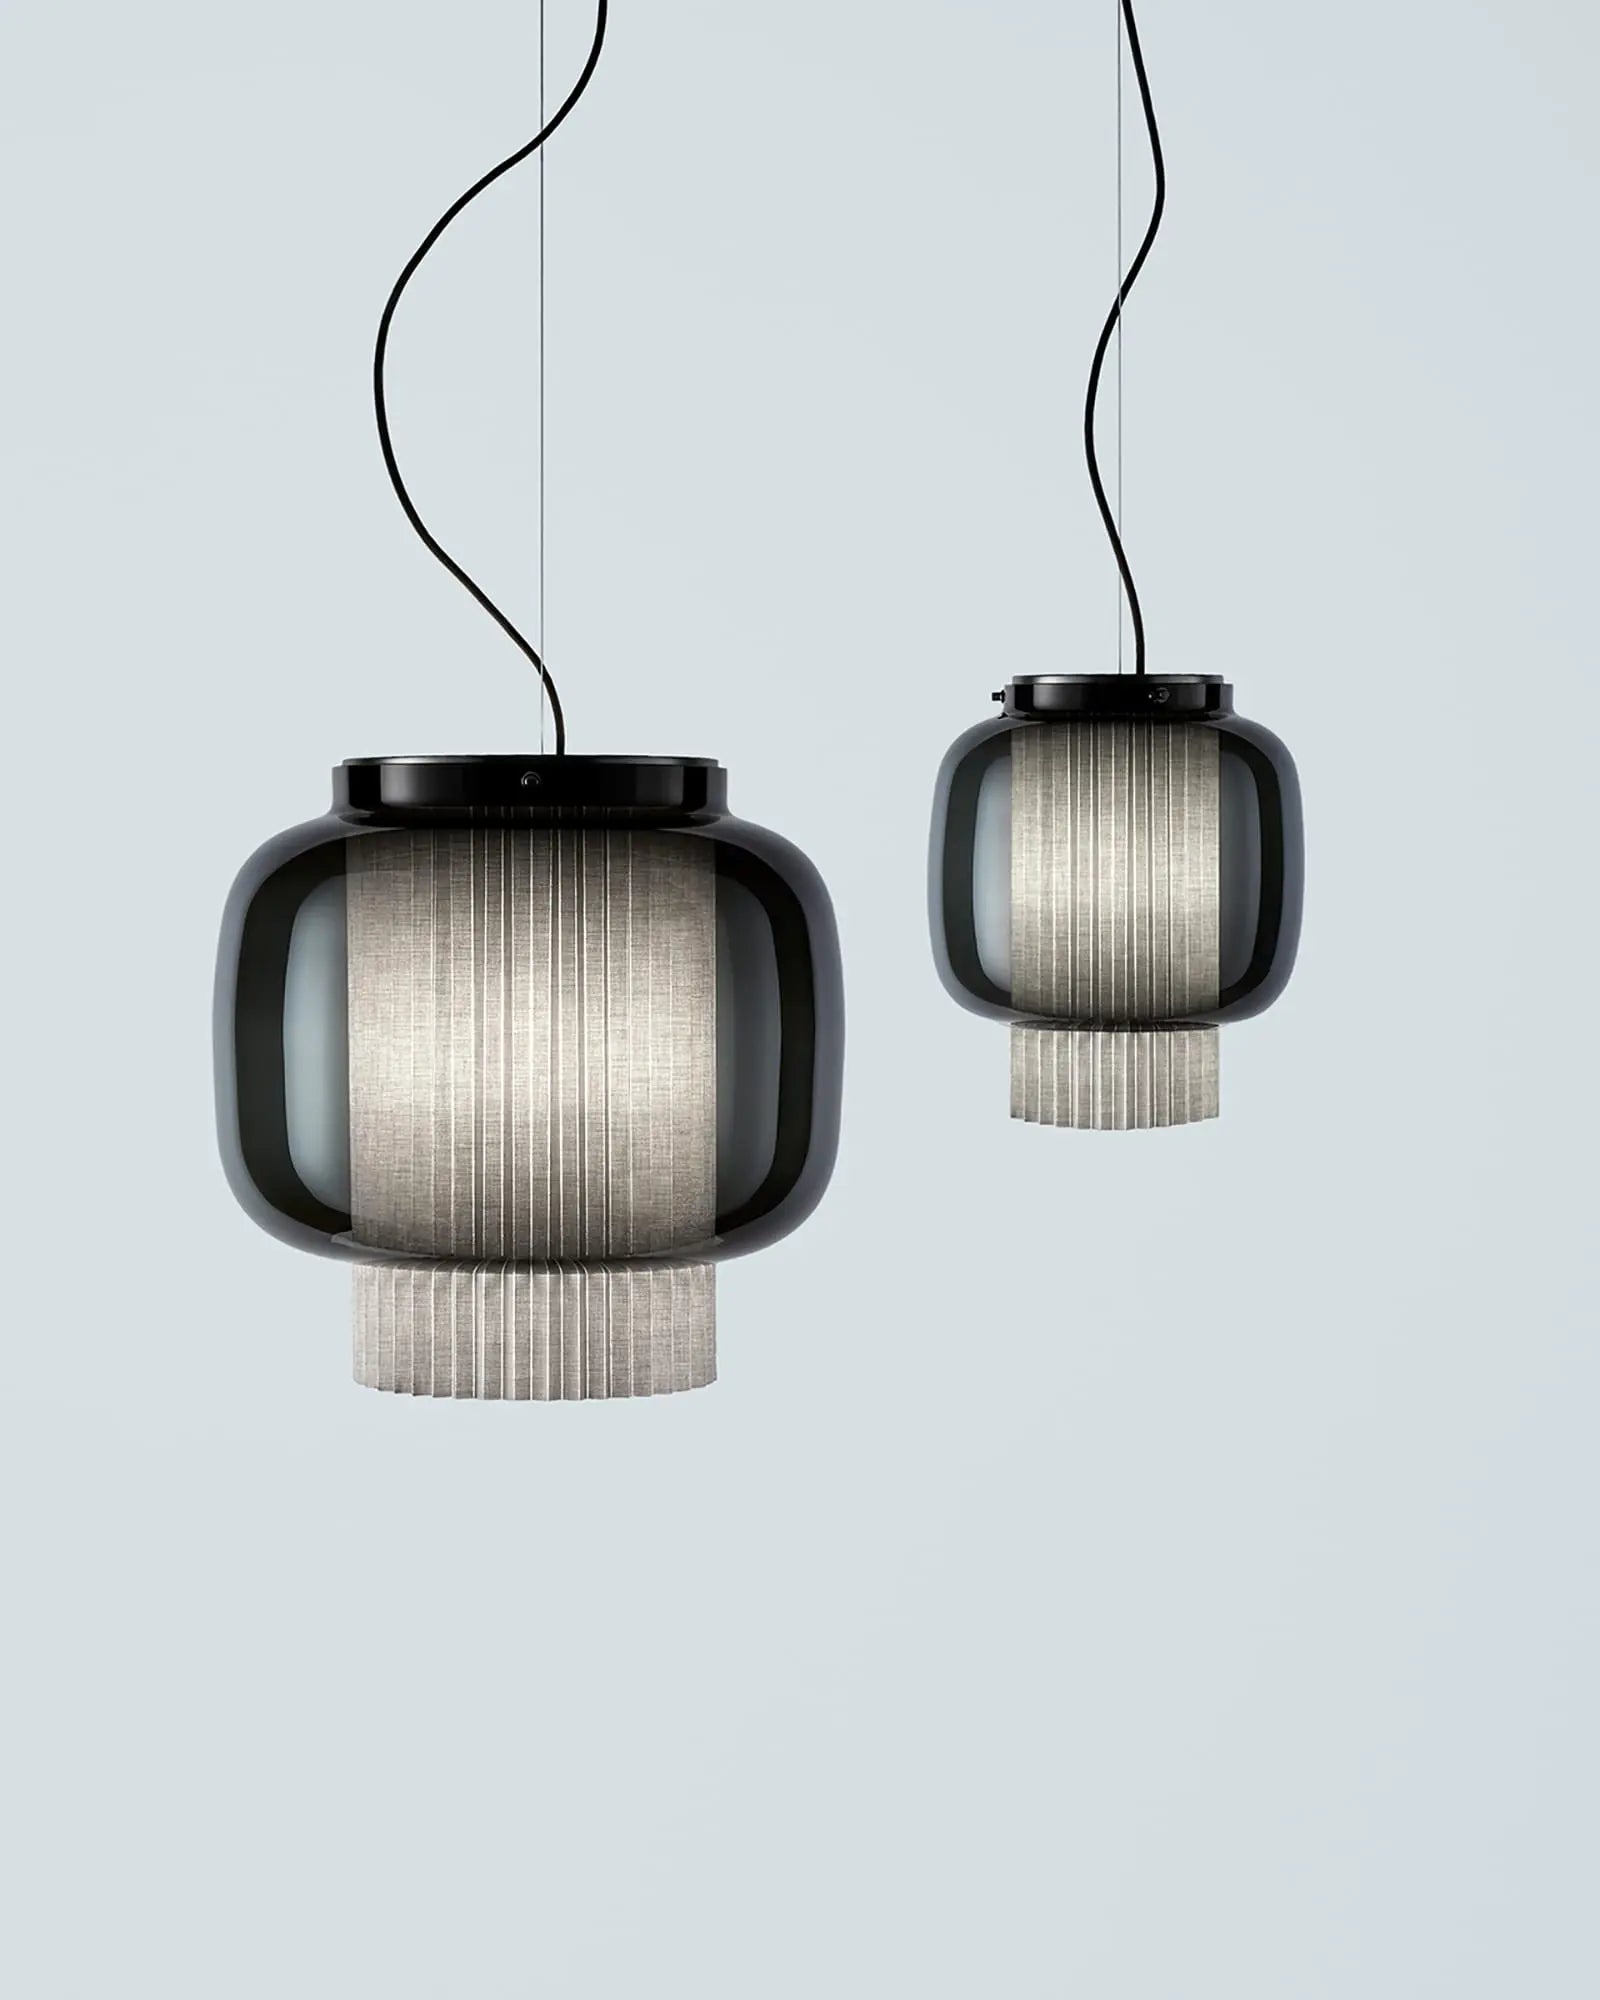 Manila Glass and textile contemporary pendant light in graphite and grey